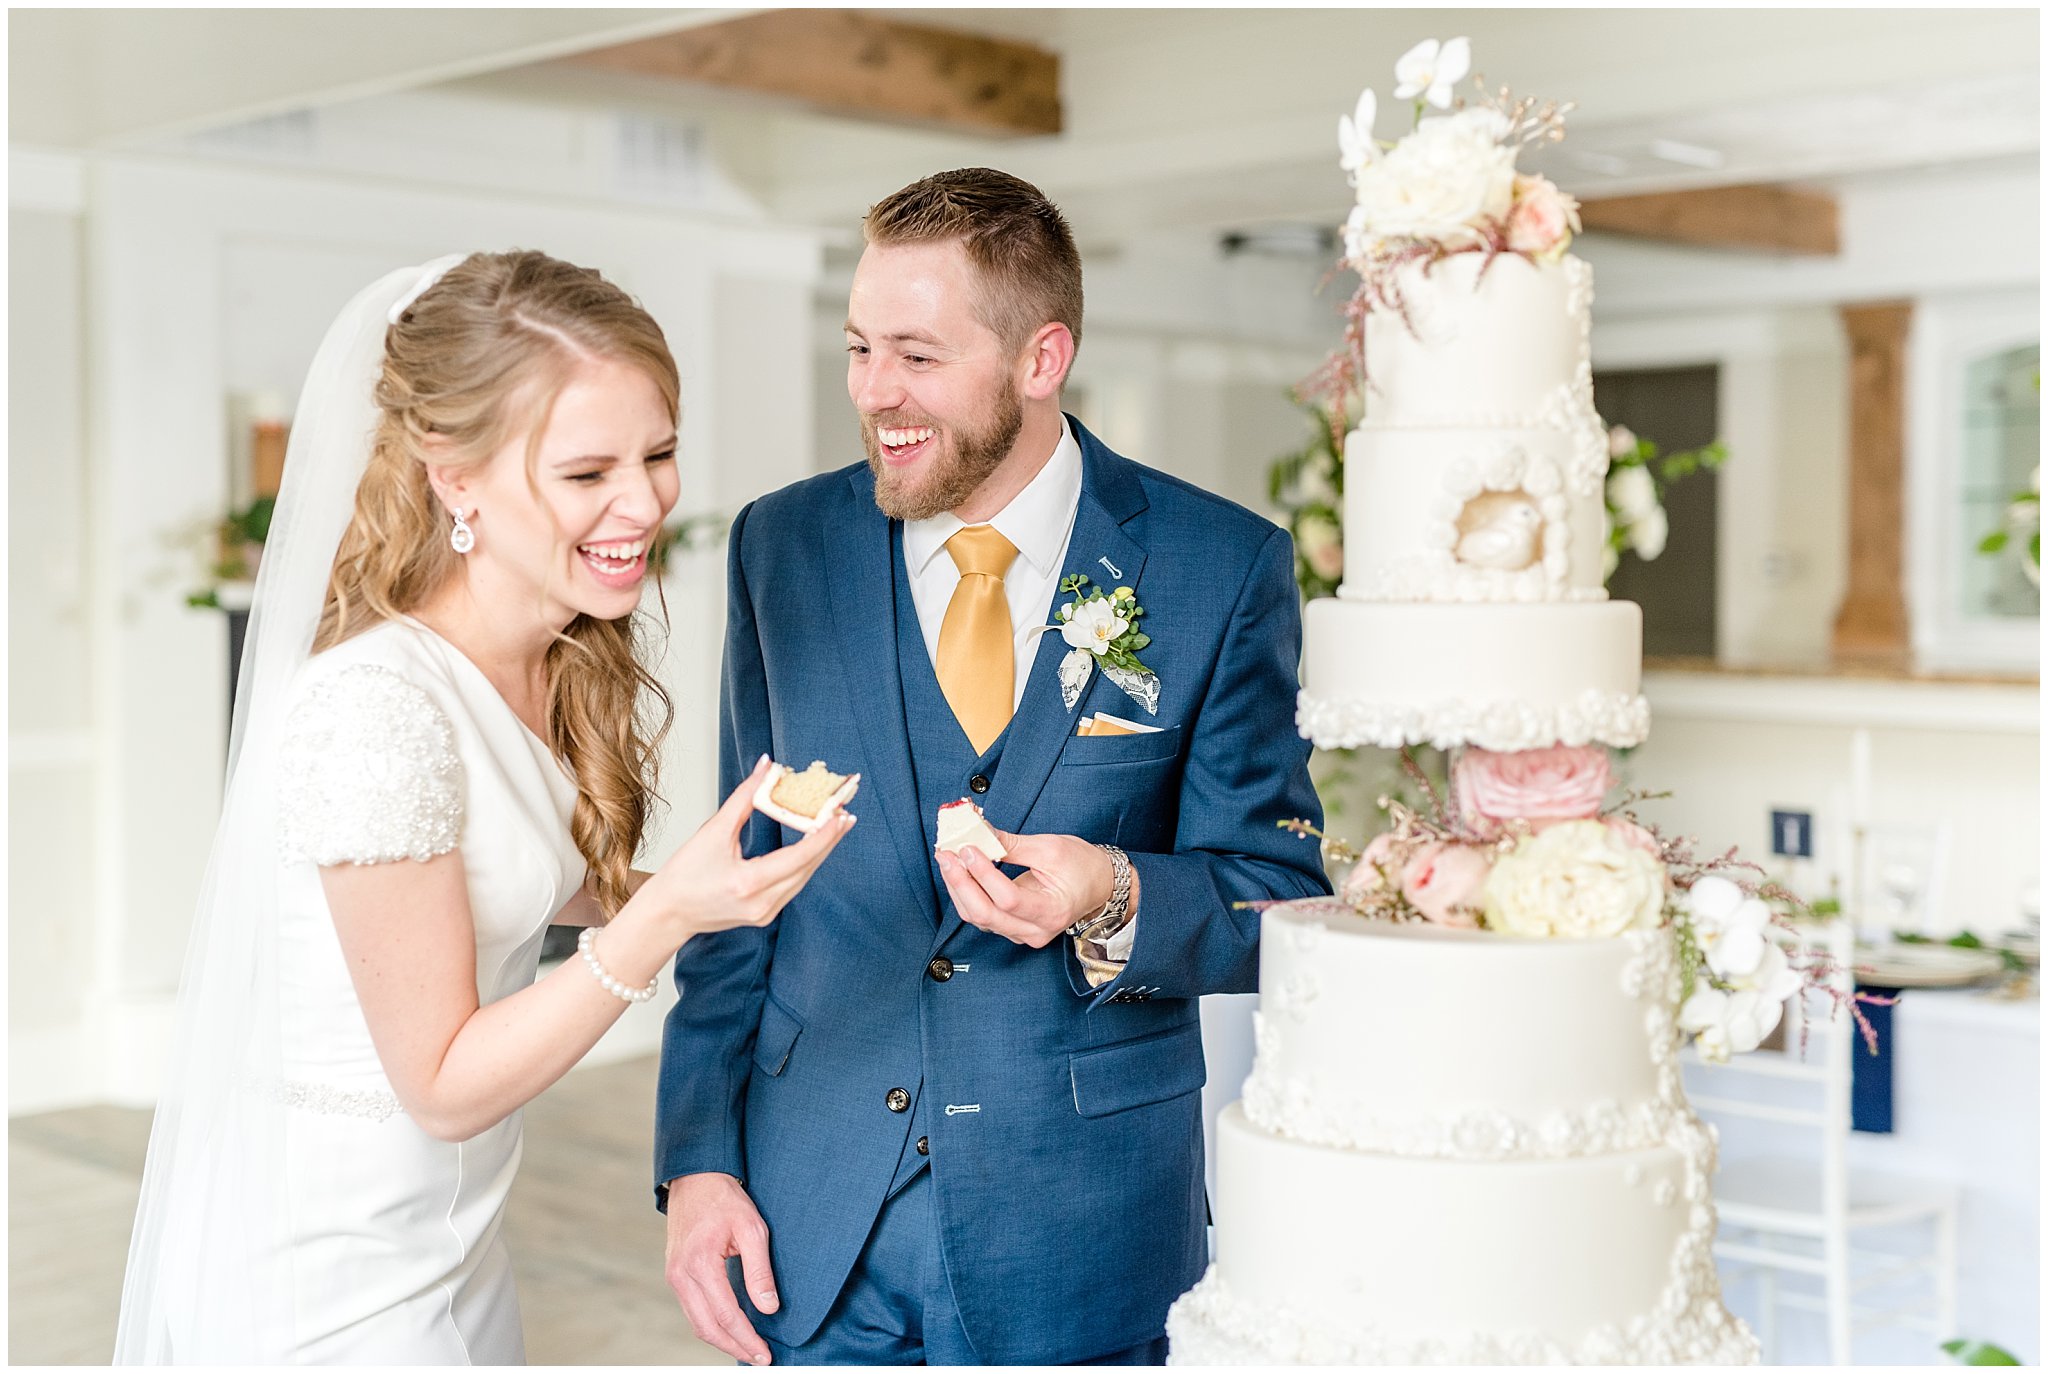 Talia Event Center wedding | Bride and groom eating cake and laughing | Jessie and Dallin Photography